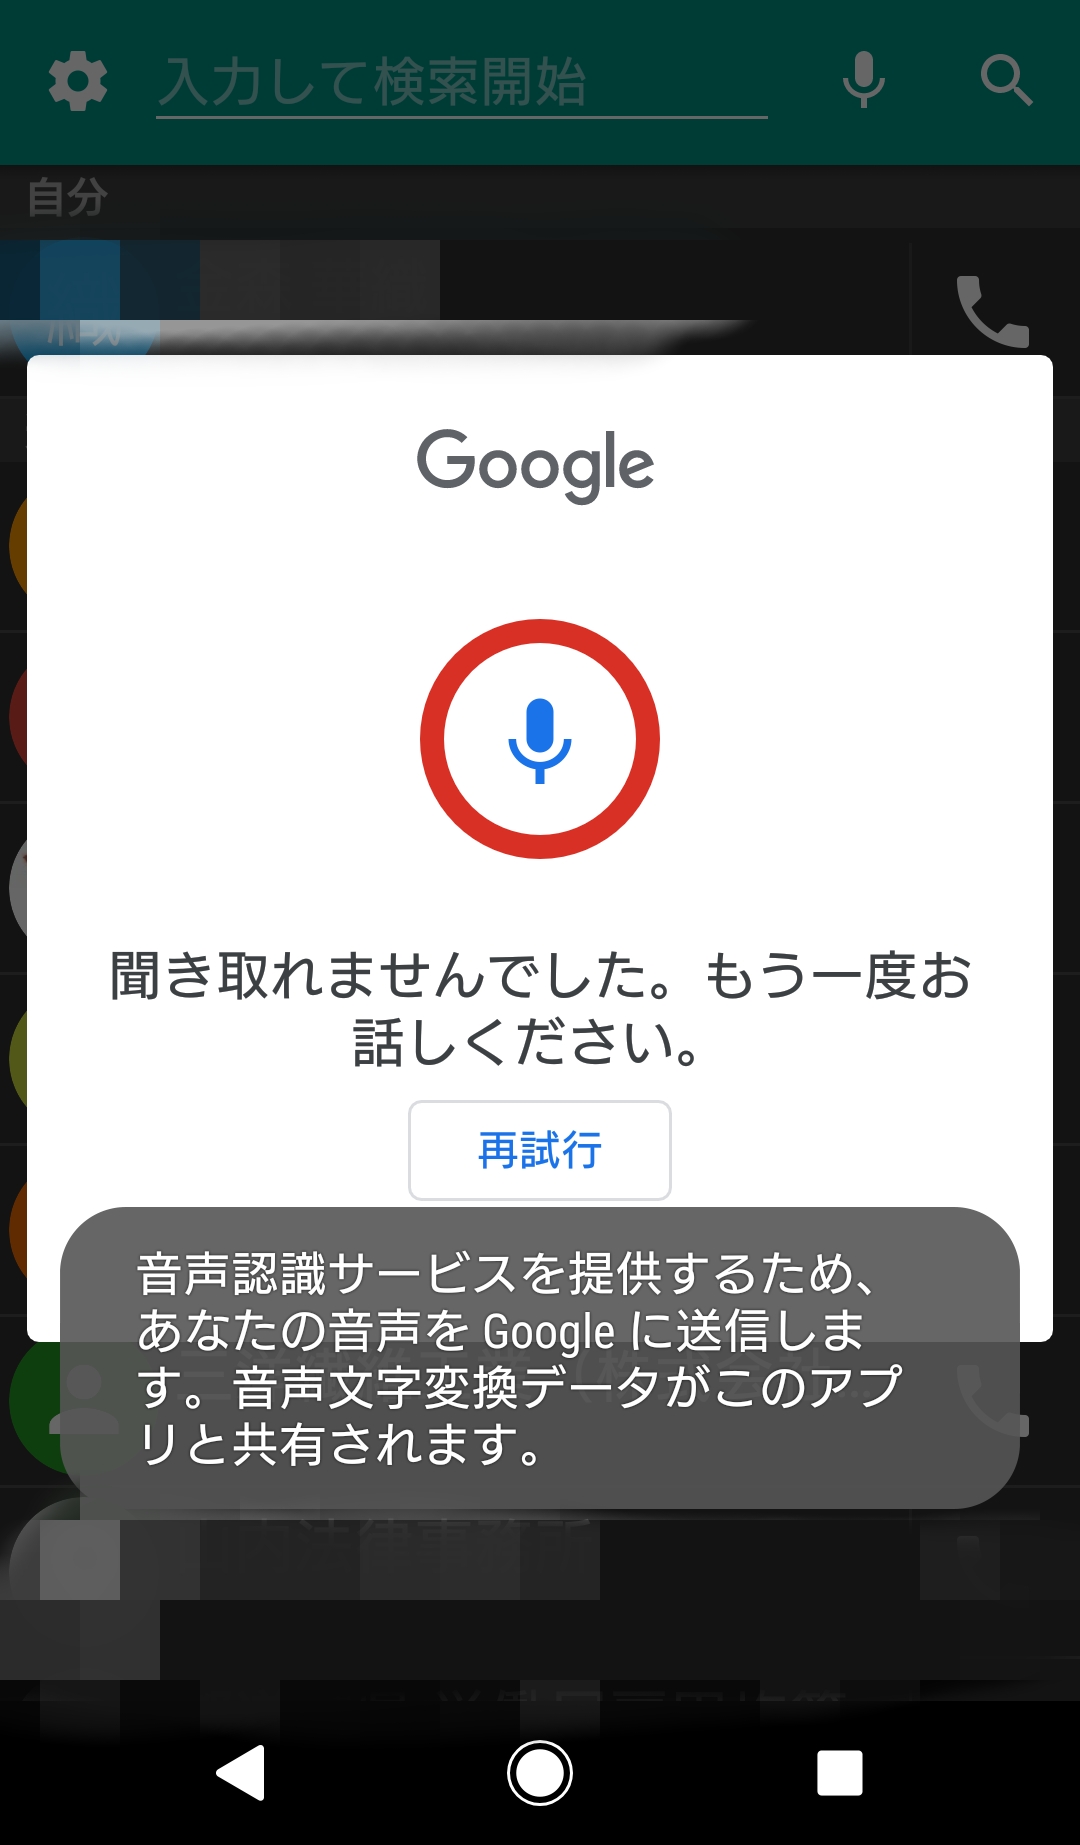 DW Contacts & Phone & SMS　音声検索　Google　音声認識サービス